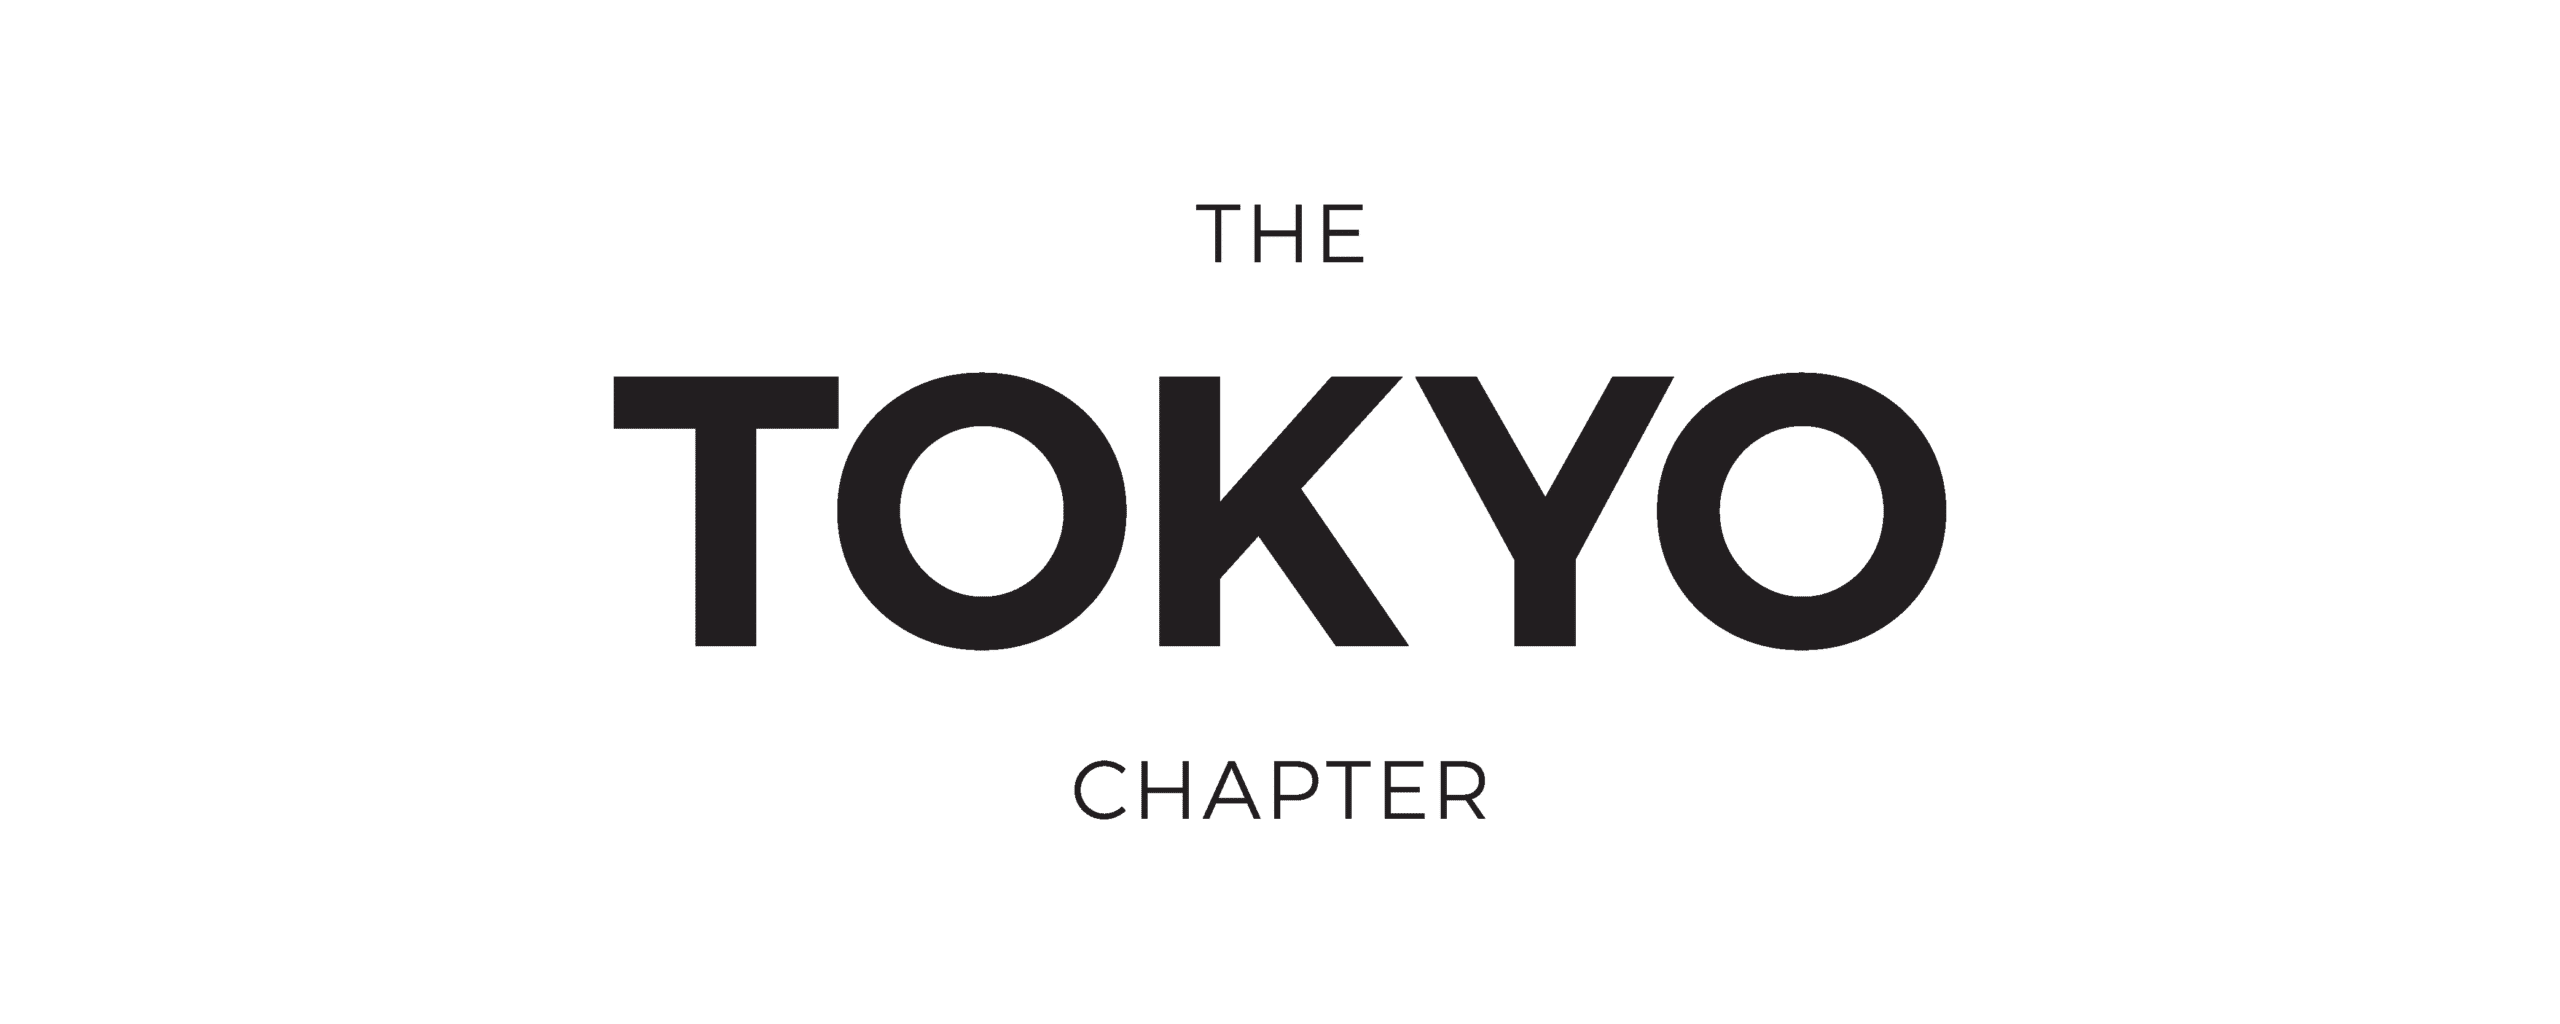 The Tokyo Chapter